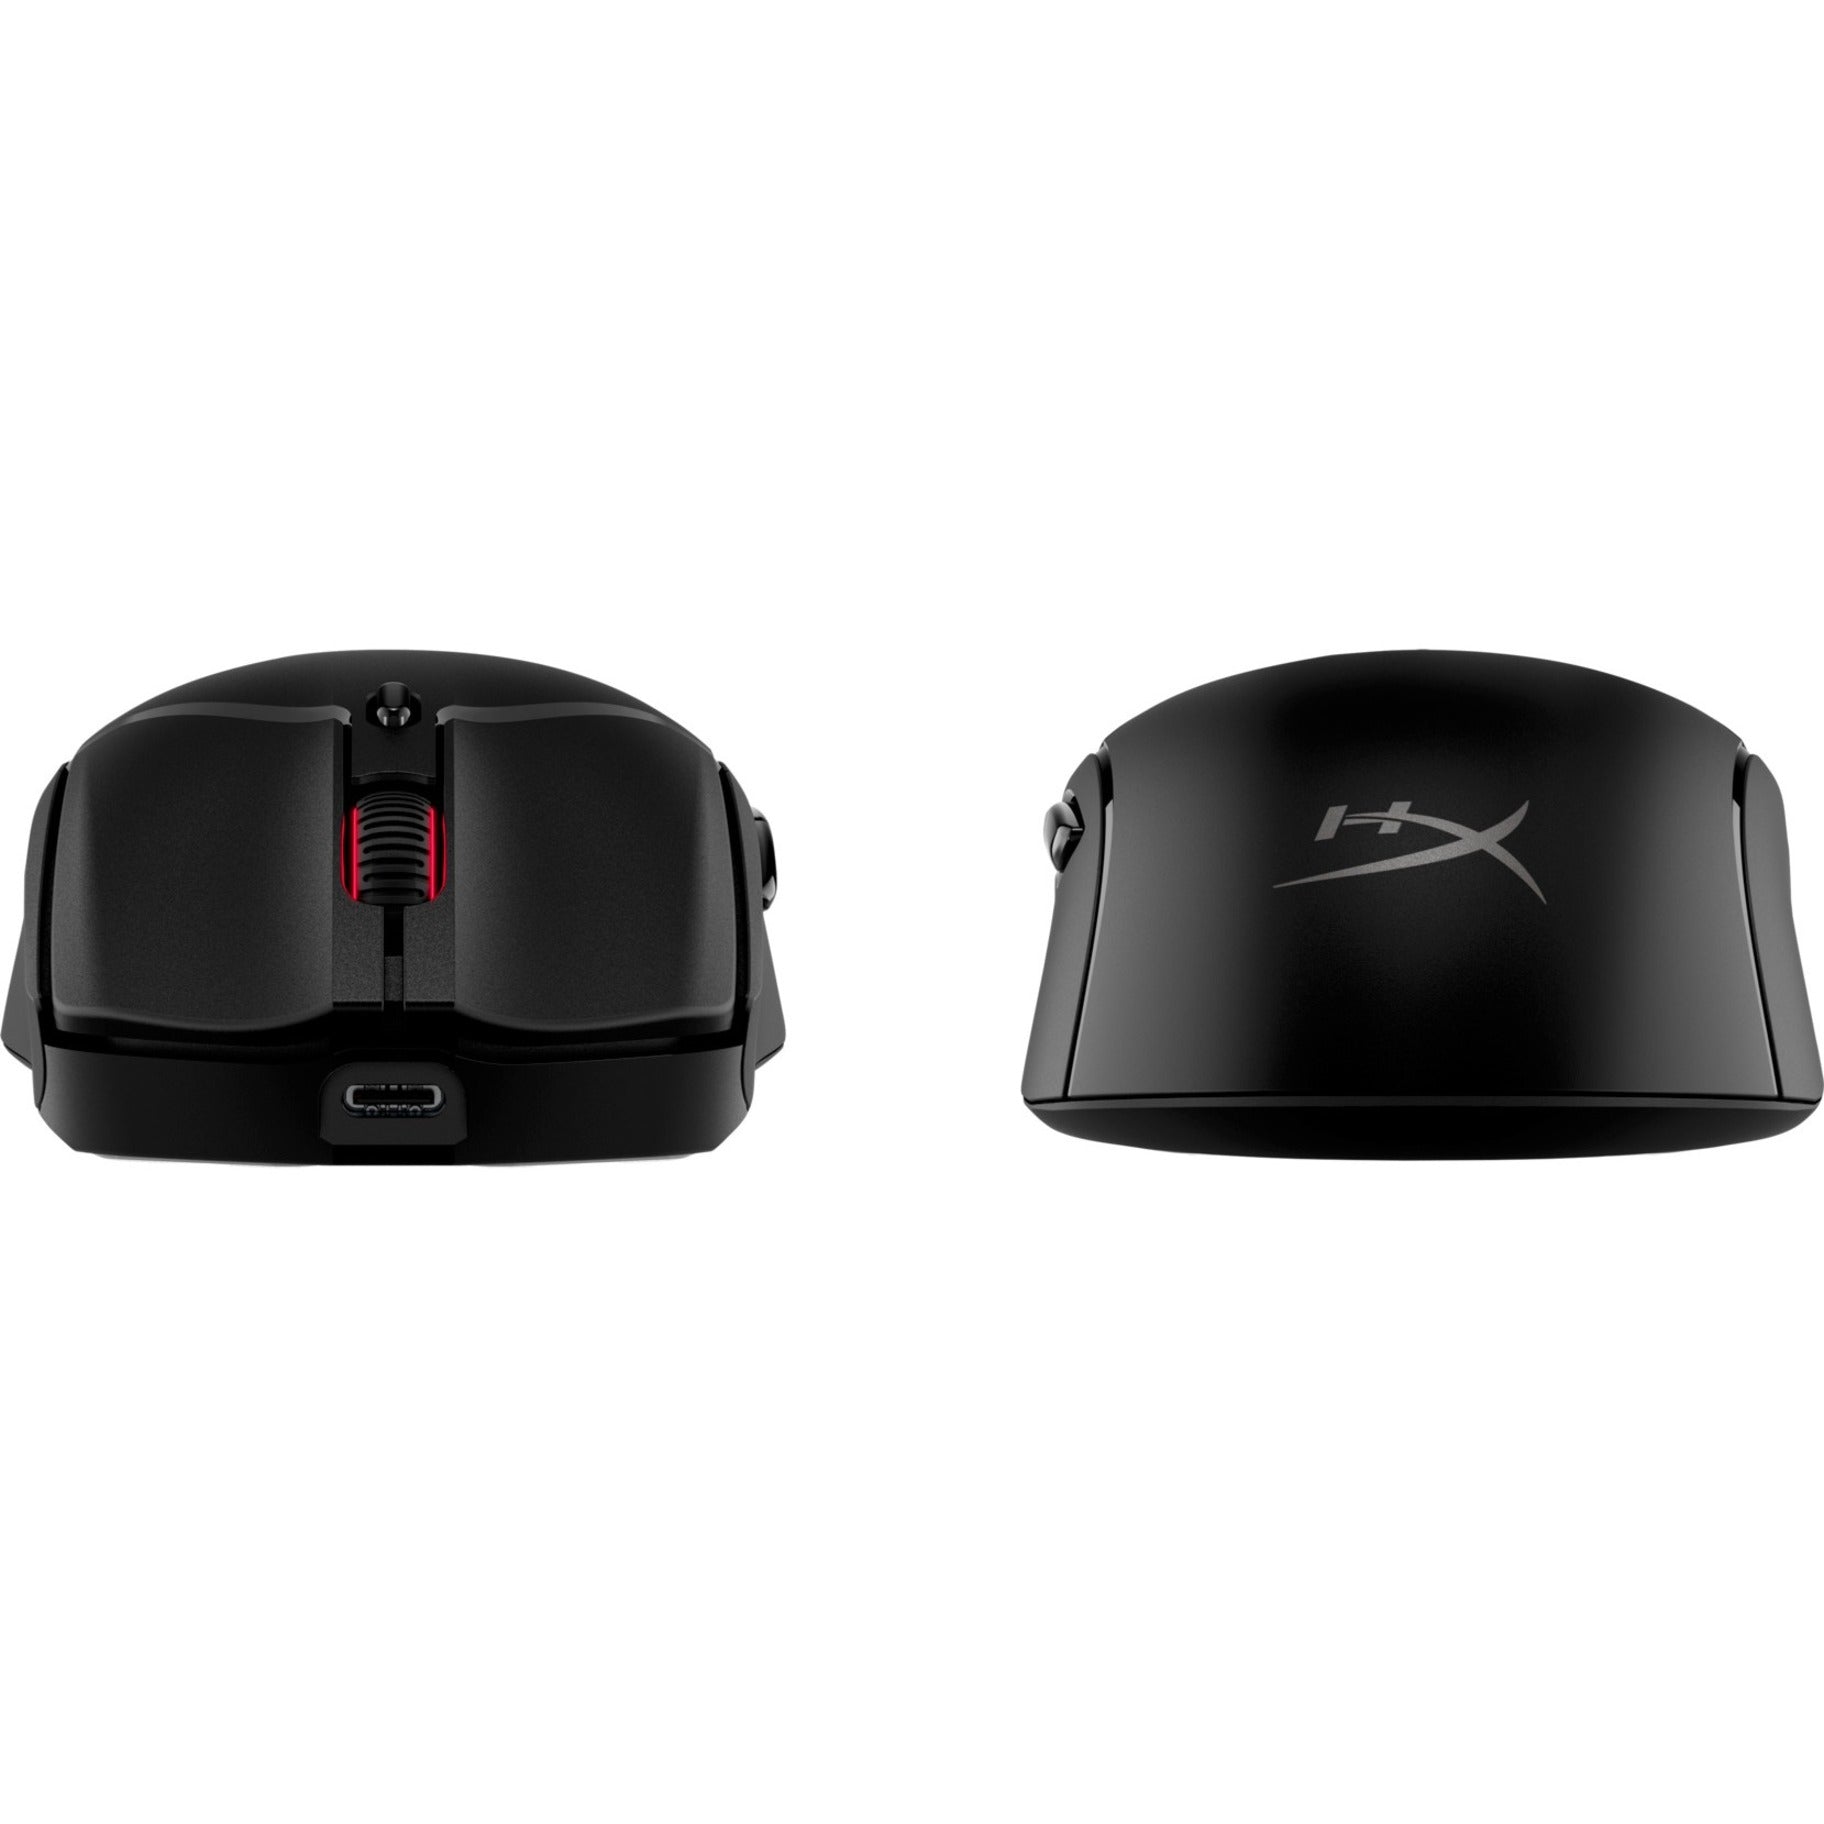 HyperX 6N0B0AA Pulsefire Haste 2 Wireless Gaming Mouse, Symmetrical, 26000 dpi, Bluetooth 5, 2.4 GHz, 6 Programmable Buttons